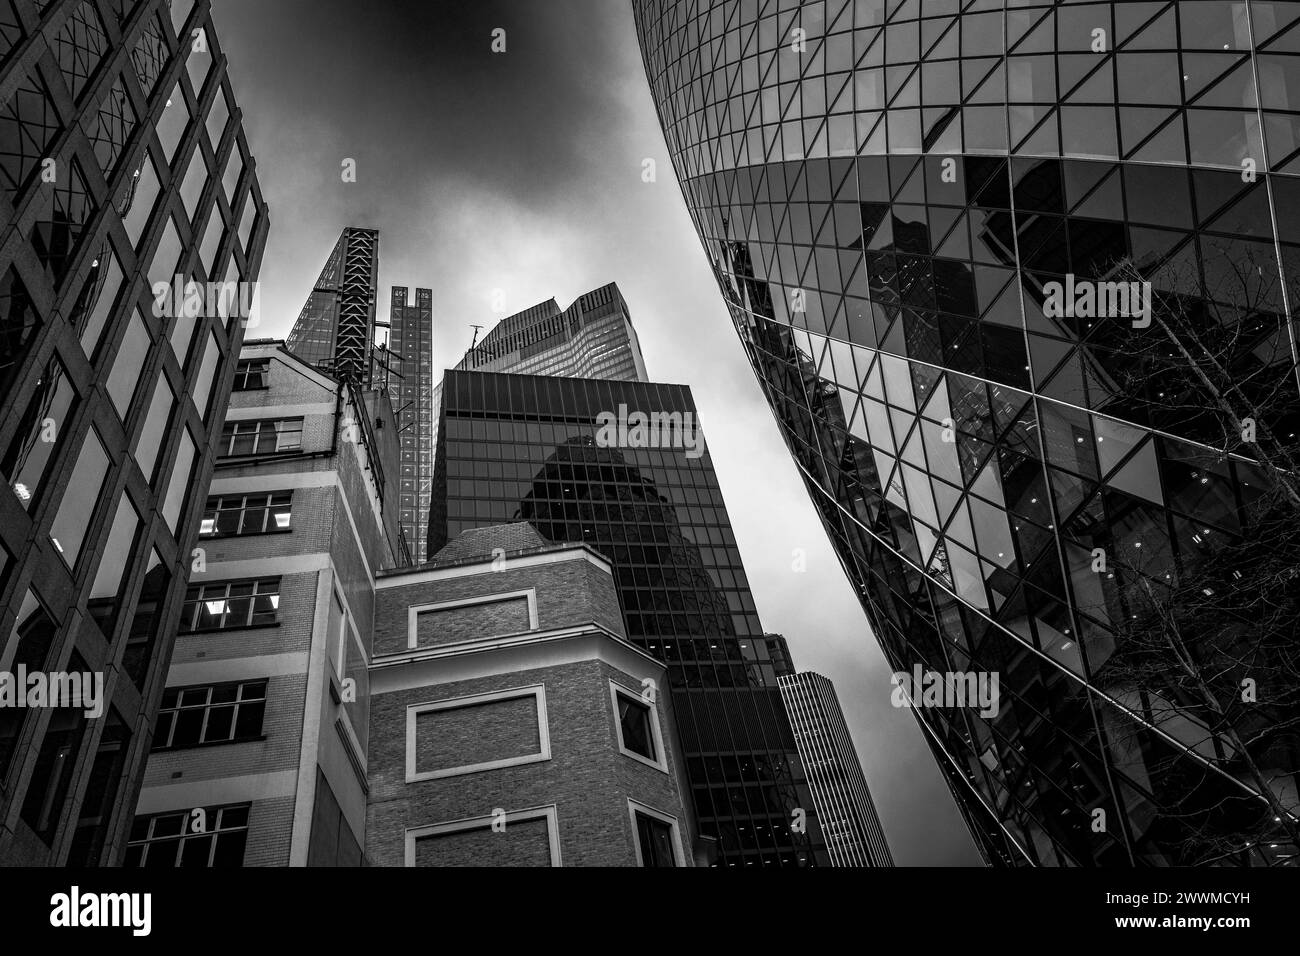 A monochrome low-angle view of urban architecture in central London. Stock Photo